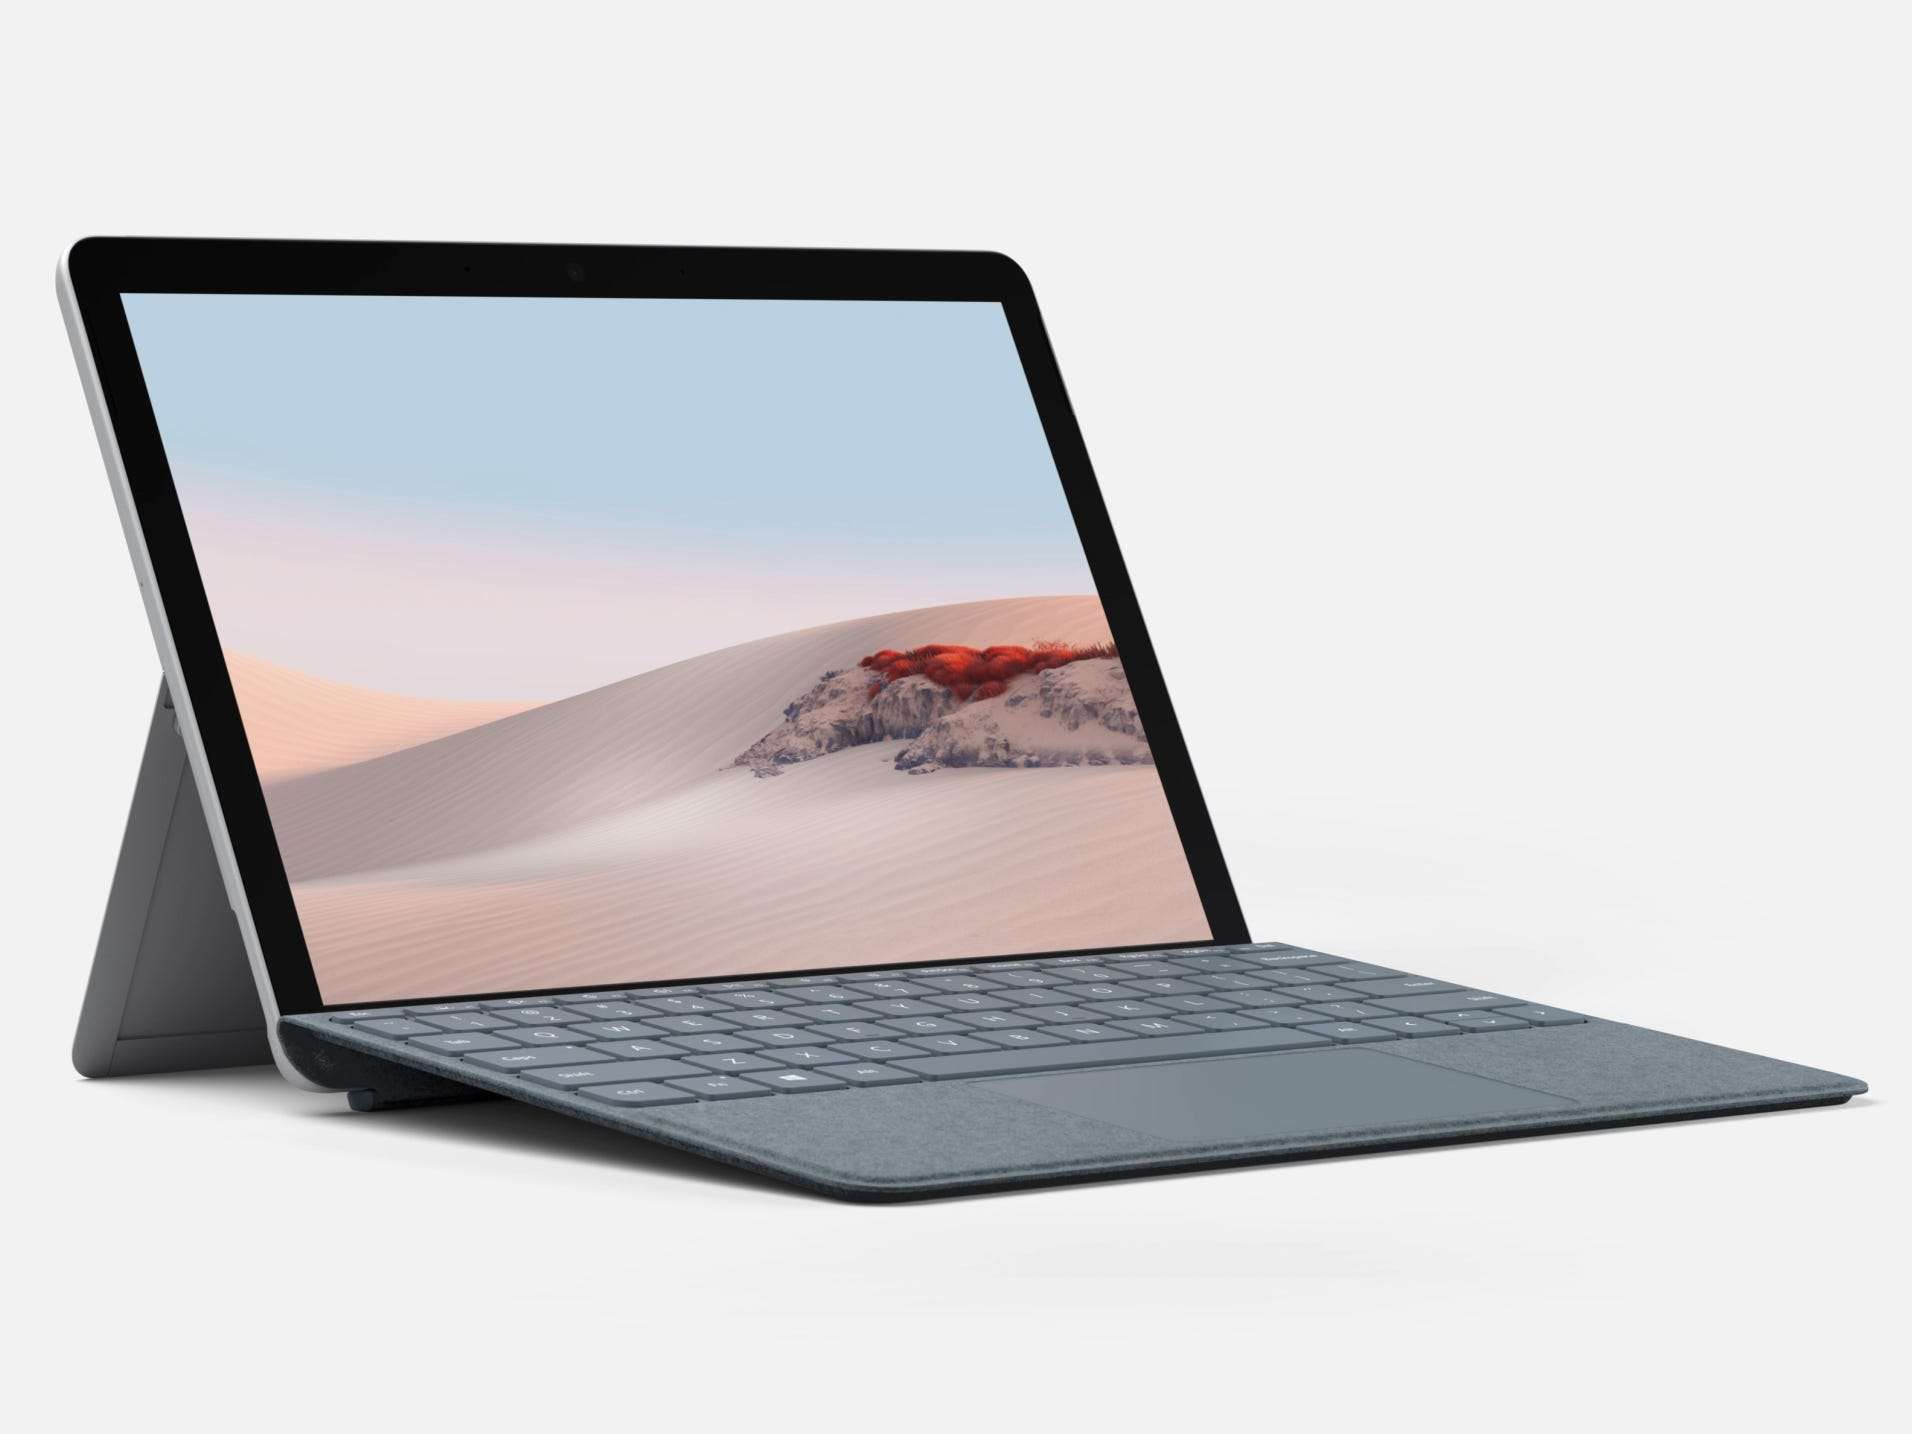 Microsoft's Surface Go 2 is an inexpensive laptop that anyone can use